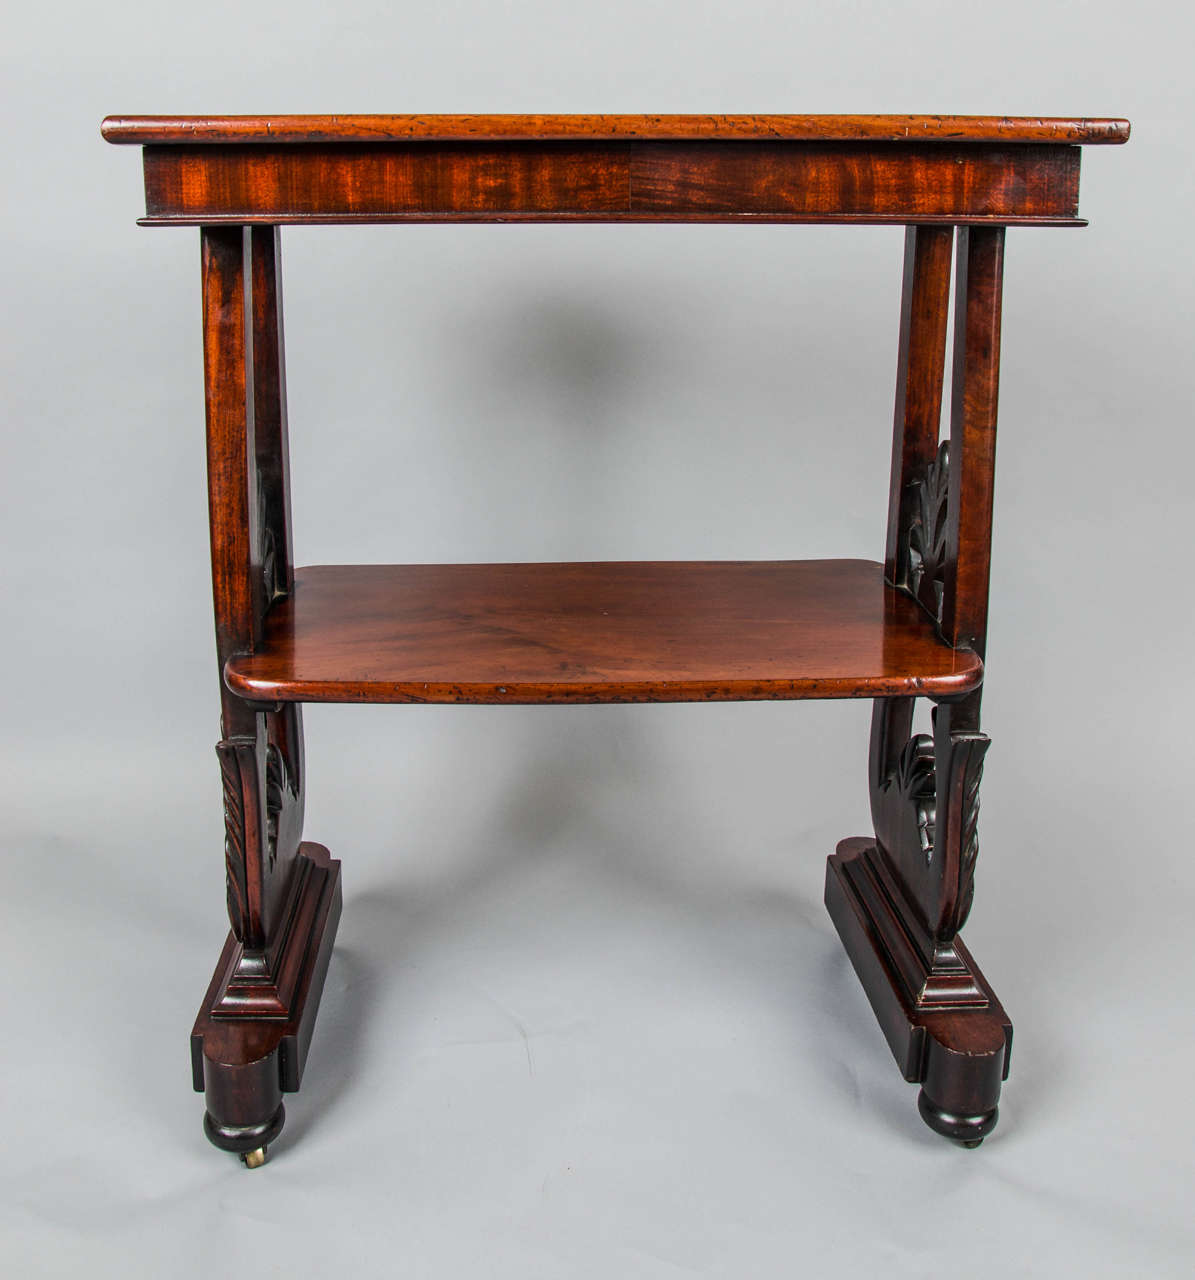 An early Victorian mahogany side or occasional table with a lower tier and exquisite carving to the sides, in the form of anthemion leaves.